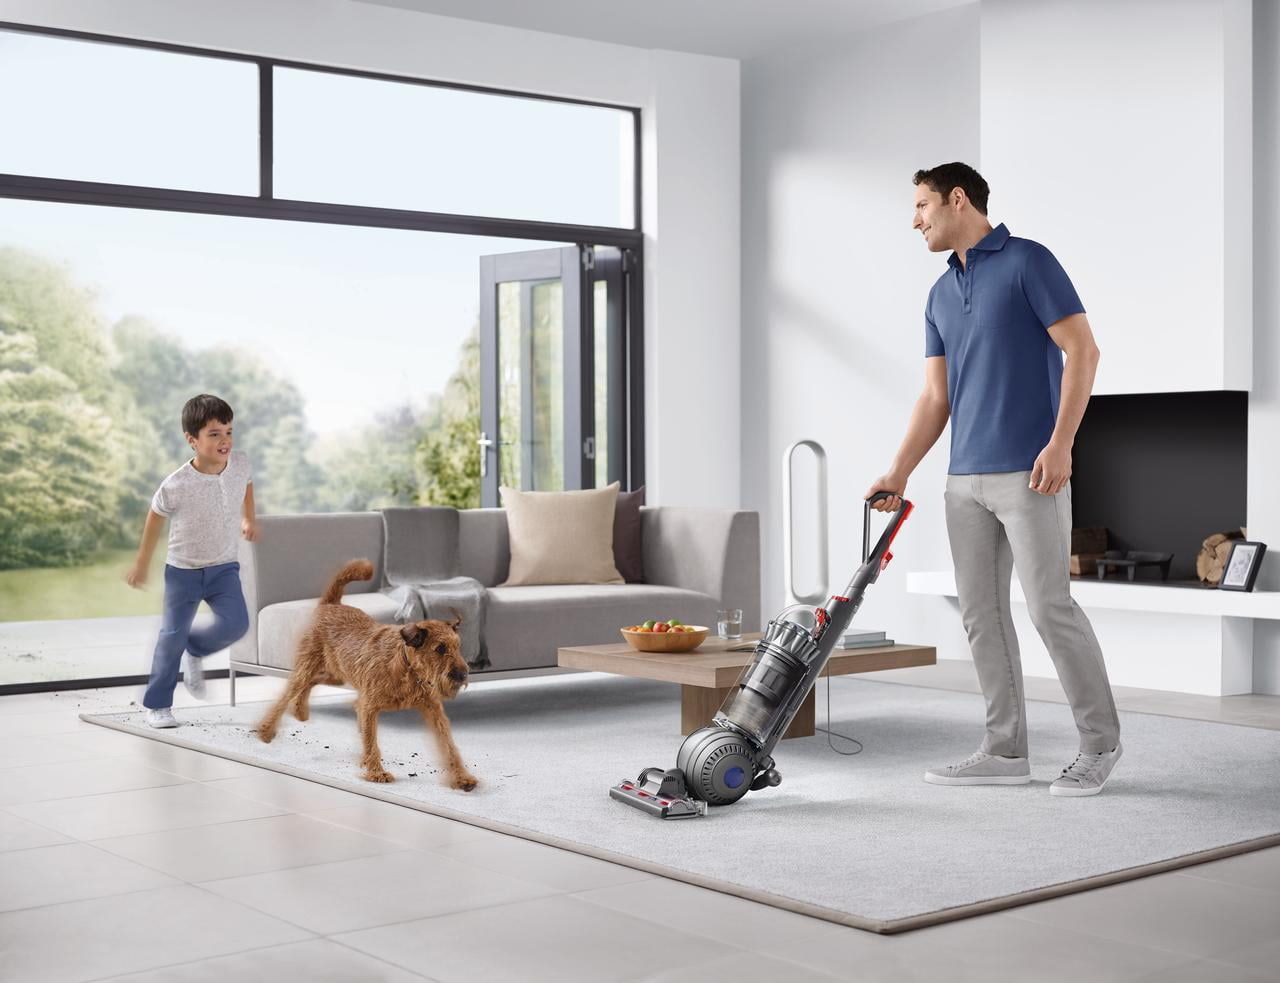 A dad vacuuming while a dog and boy run around